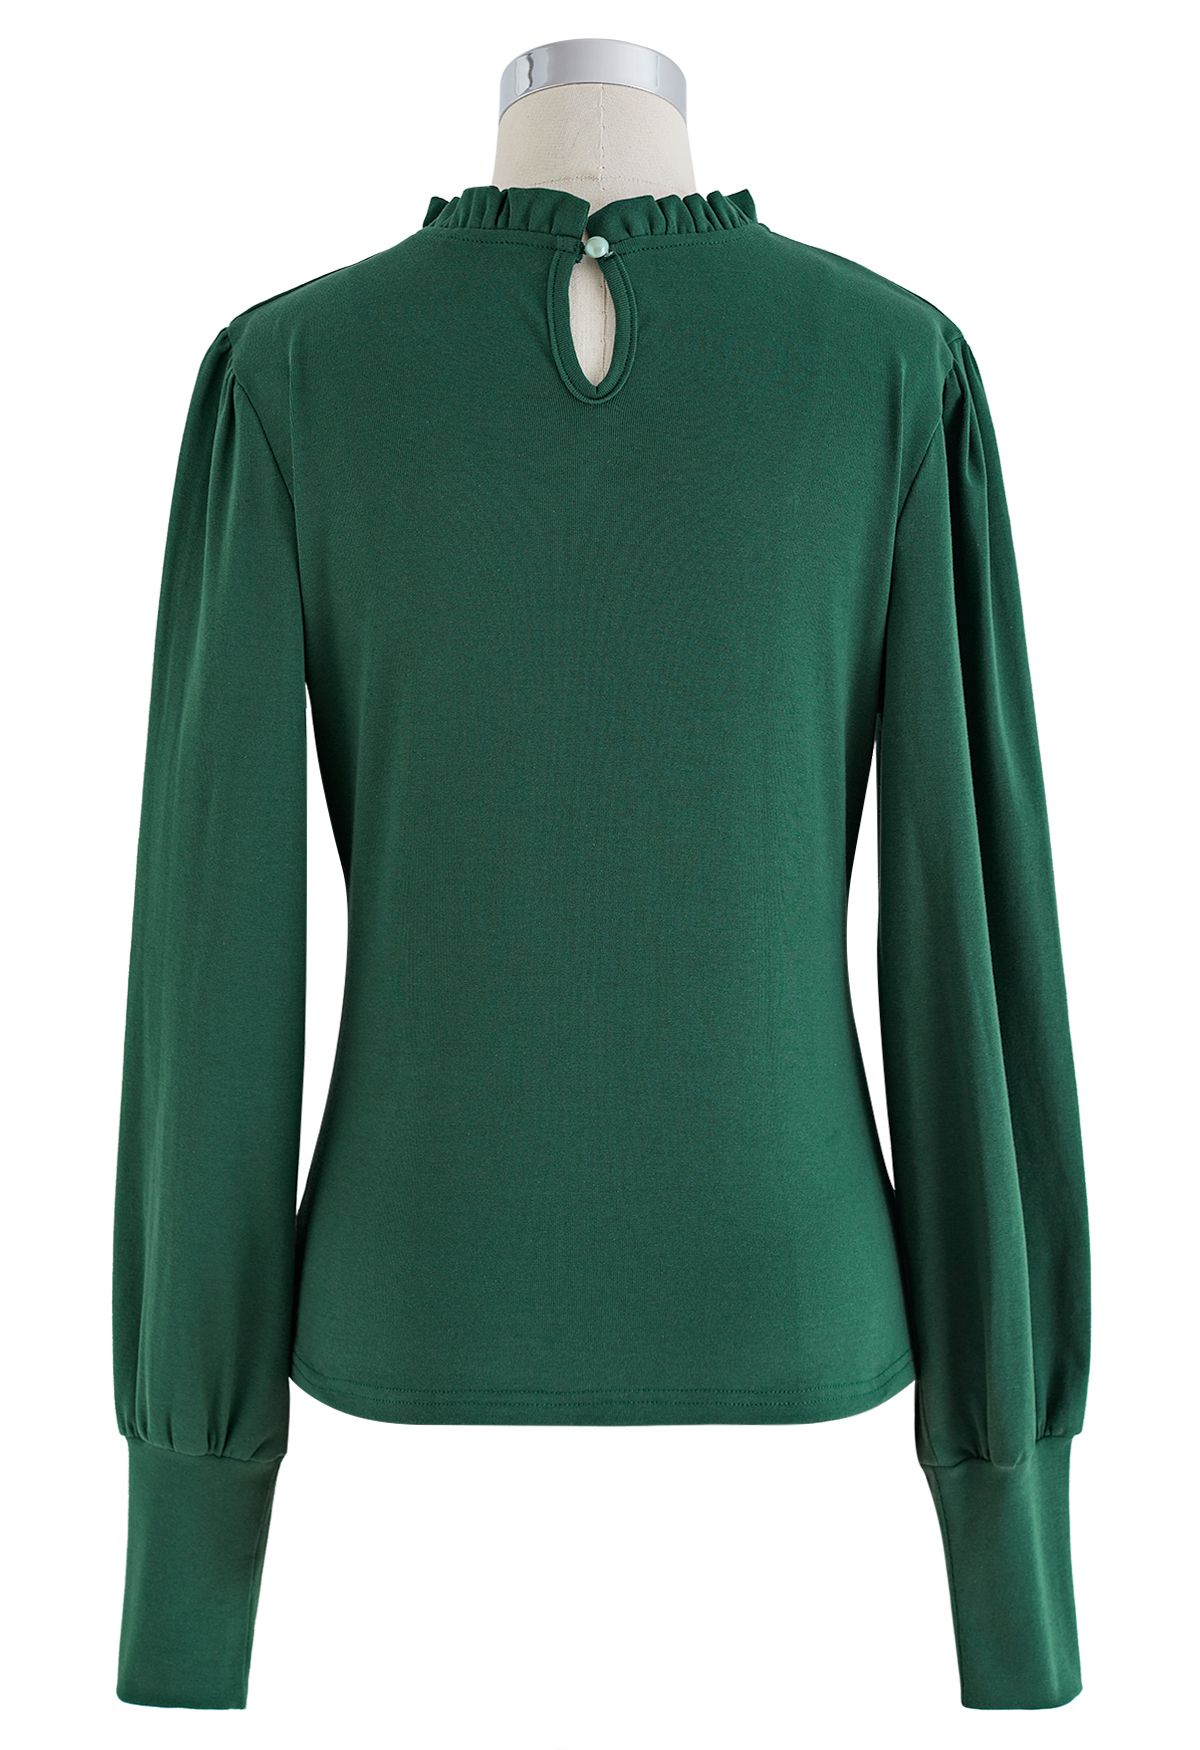 Ruched Front Ruffle Neck Fitted Top in Dark Green